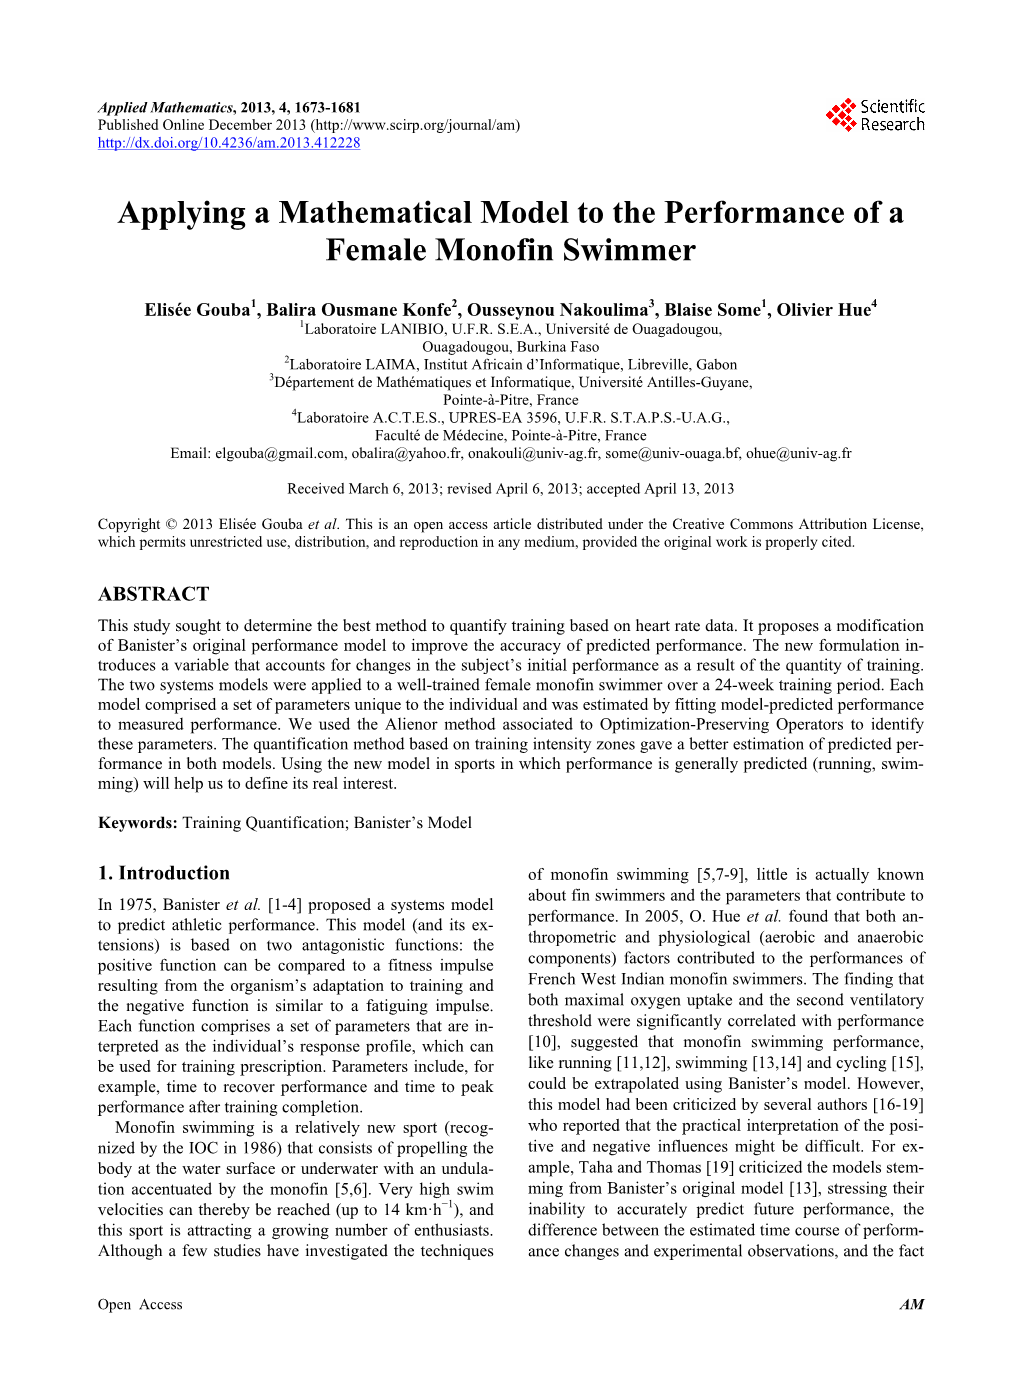 Applying a Mathematical Model to the Performance of a Female Monofin Swimmer